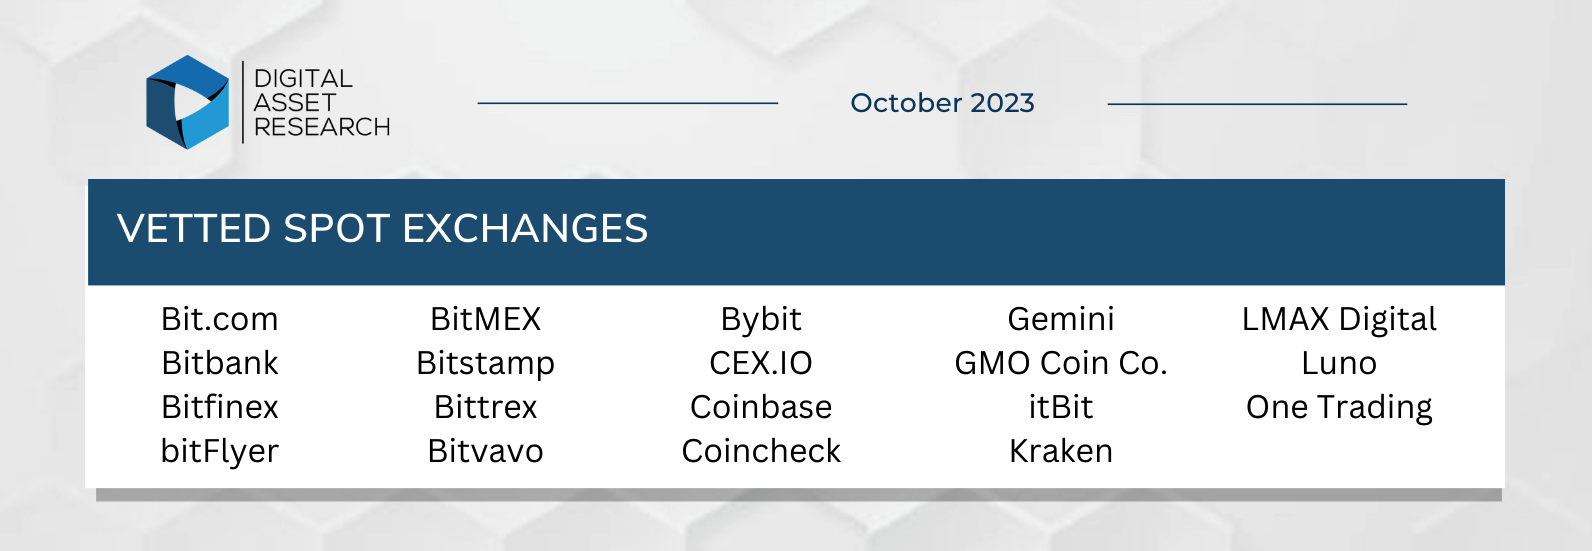 Digital Asset Research Announces October 2023 Crypto Exchange Vetting Results